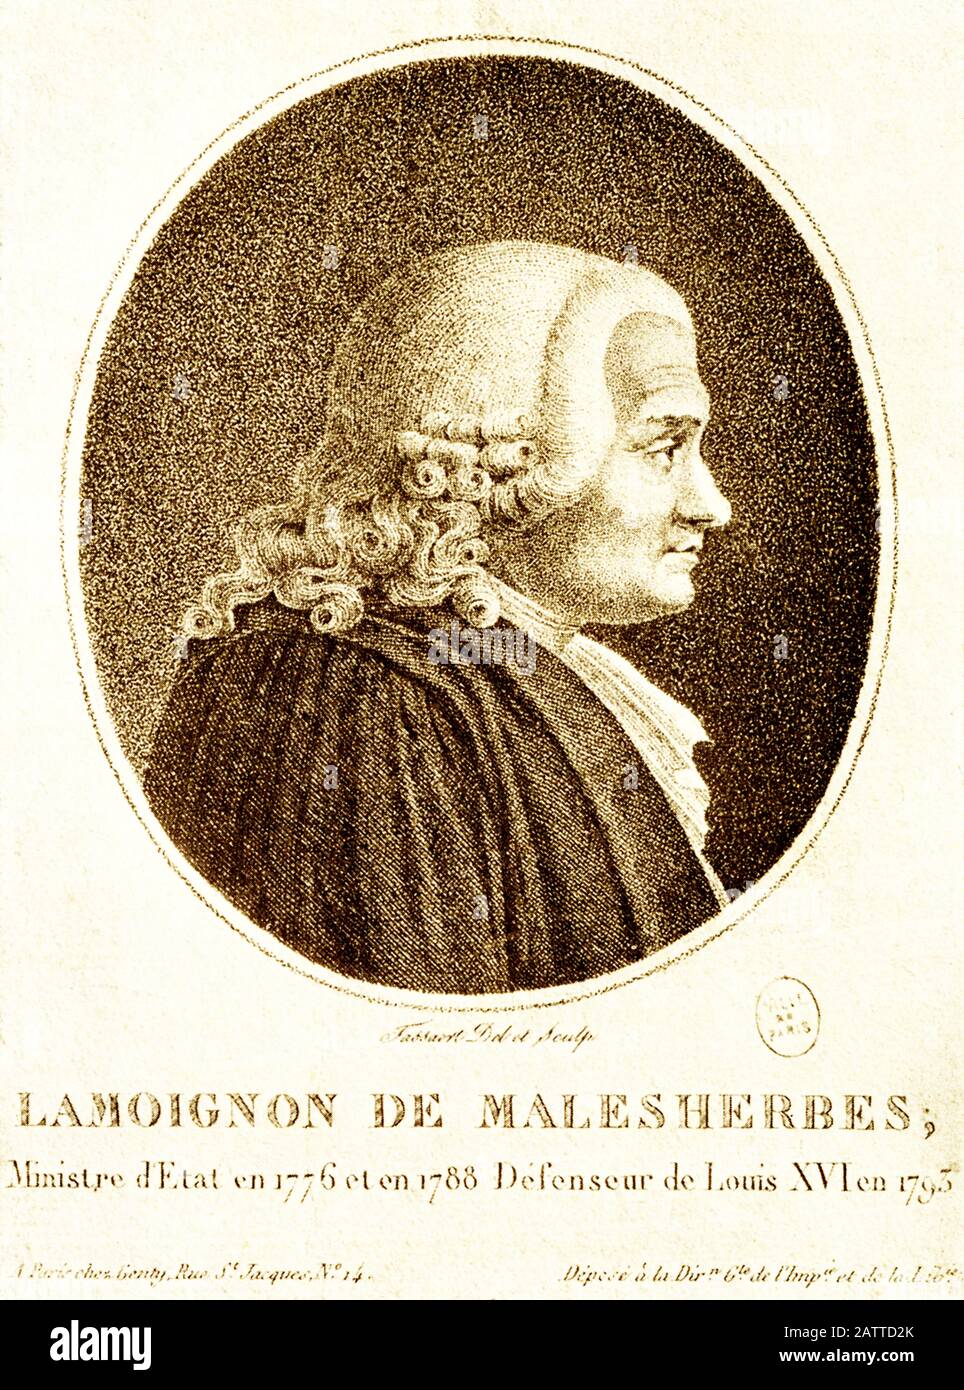 This illustration shows Lamoignon de Malesherbes, counsel for King XVI at his trial in 1793. Guillaume-Chretien de Lamoignon de Malesherbes (1721 –1794), was a French statesman and minister in France and later counsel for the defense of Louis XVI. Despite his committed monarchism, his writings contributed to the development of liberalism during the French Age of Enlightenment. He was Minister (Secretary) of State from 1776 to 1788. Stock Photo